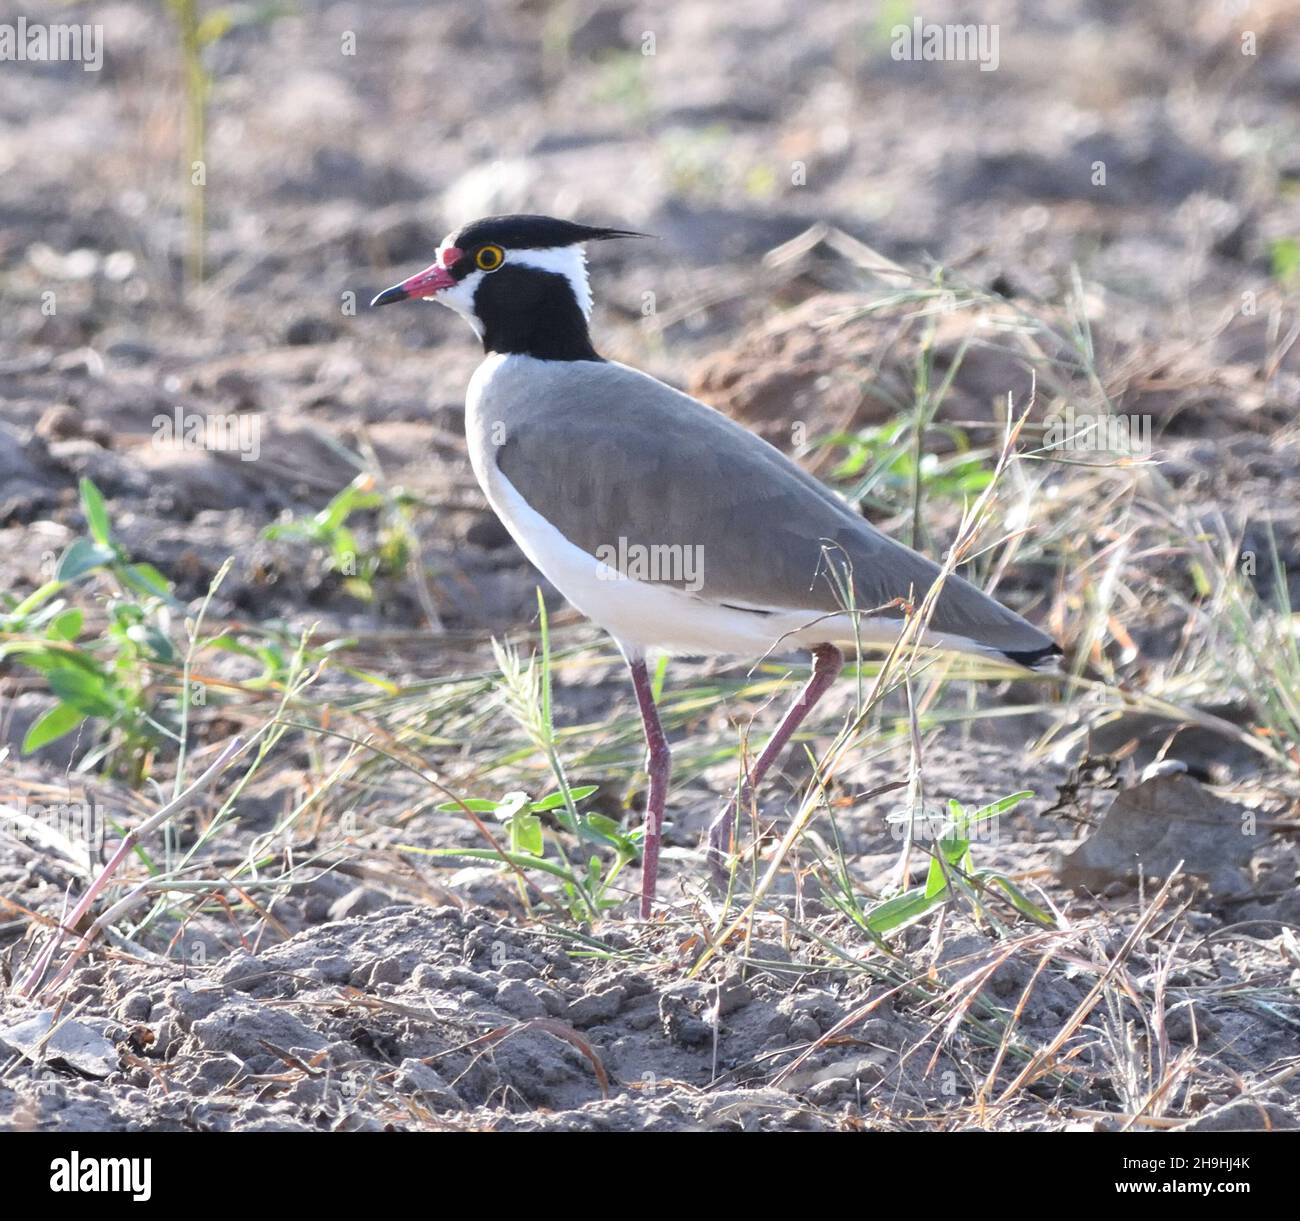 A black-headed lapwing (Vanellus tectus) foraging in a cultivated field. Kaur.  The Republic of the Gambia. Stock Photo